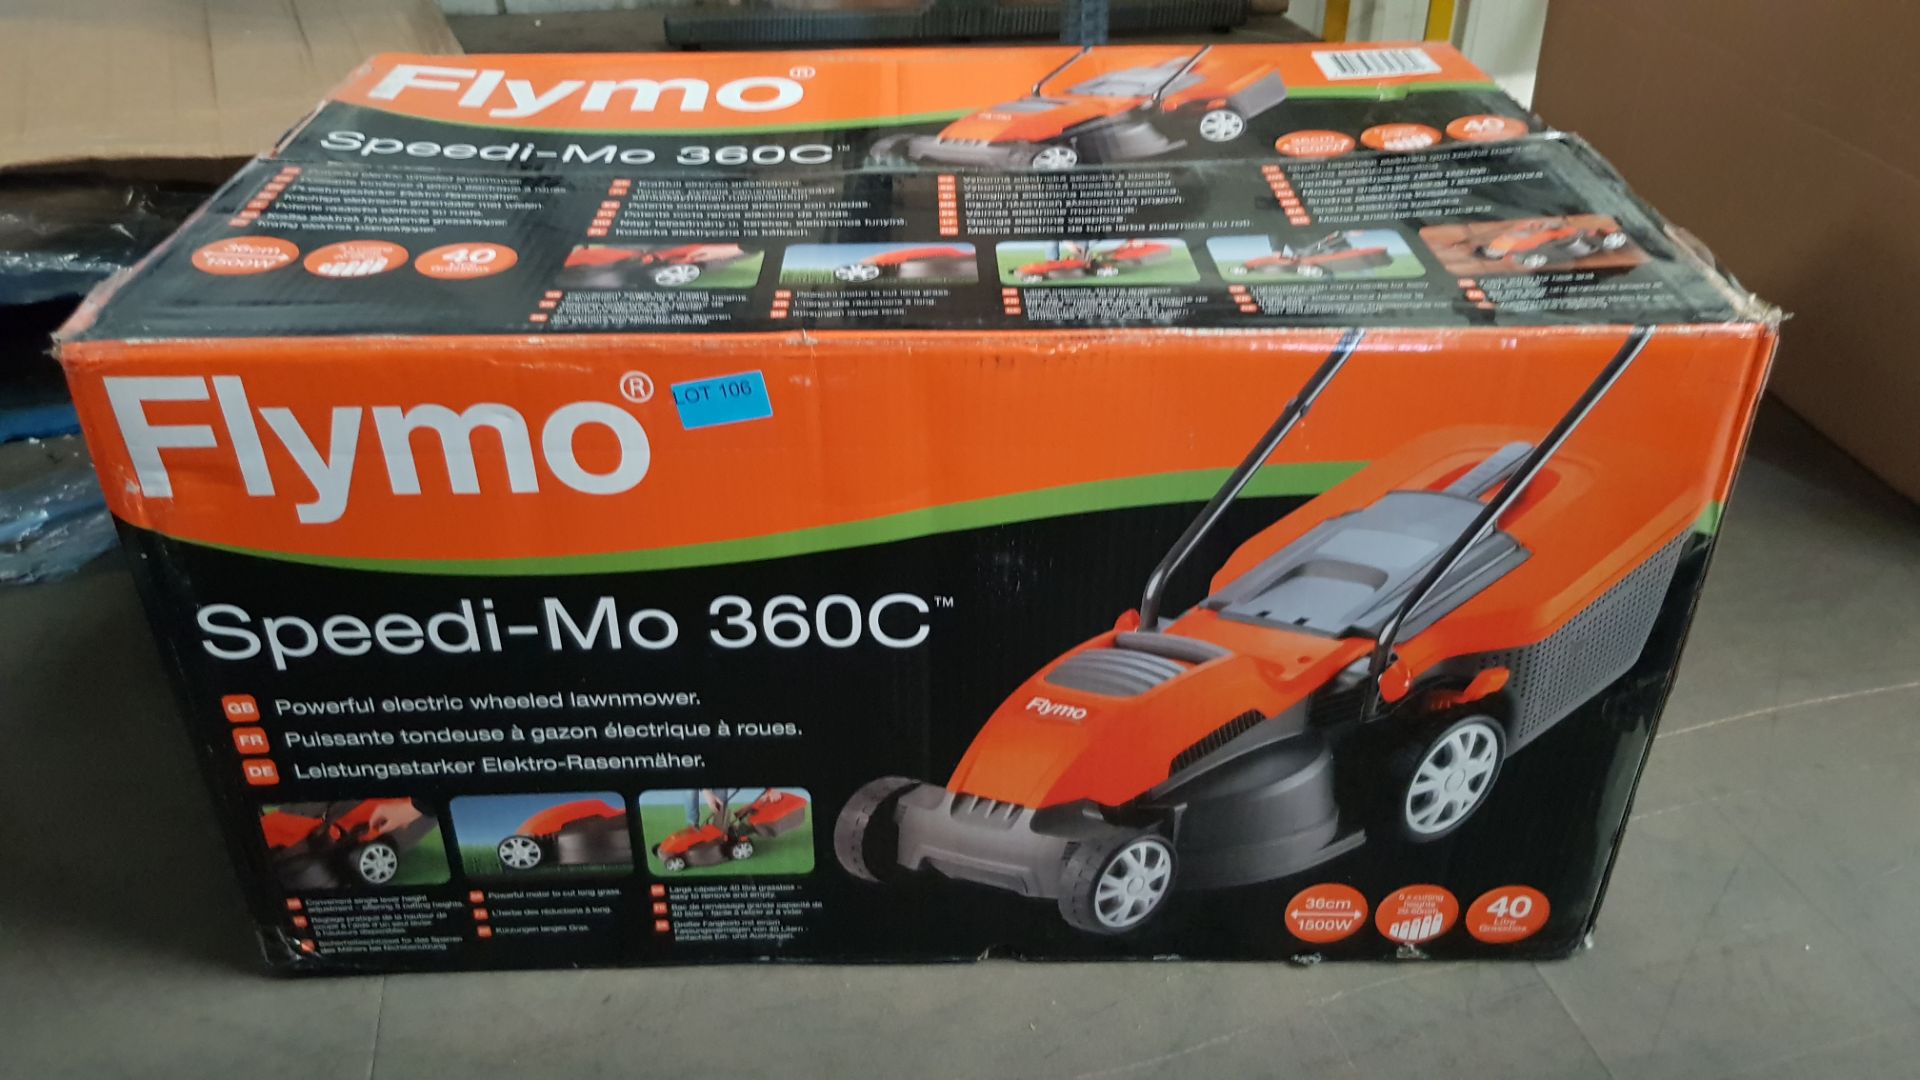 (P2) 1x Flymo Speedi-Mo 360C. RRP £109.99. Unit Appears Clean, As New. Contents In Original Package - Image 3 of 5